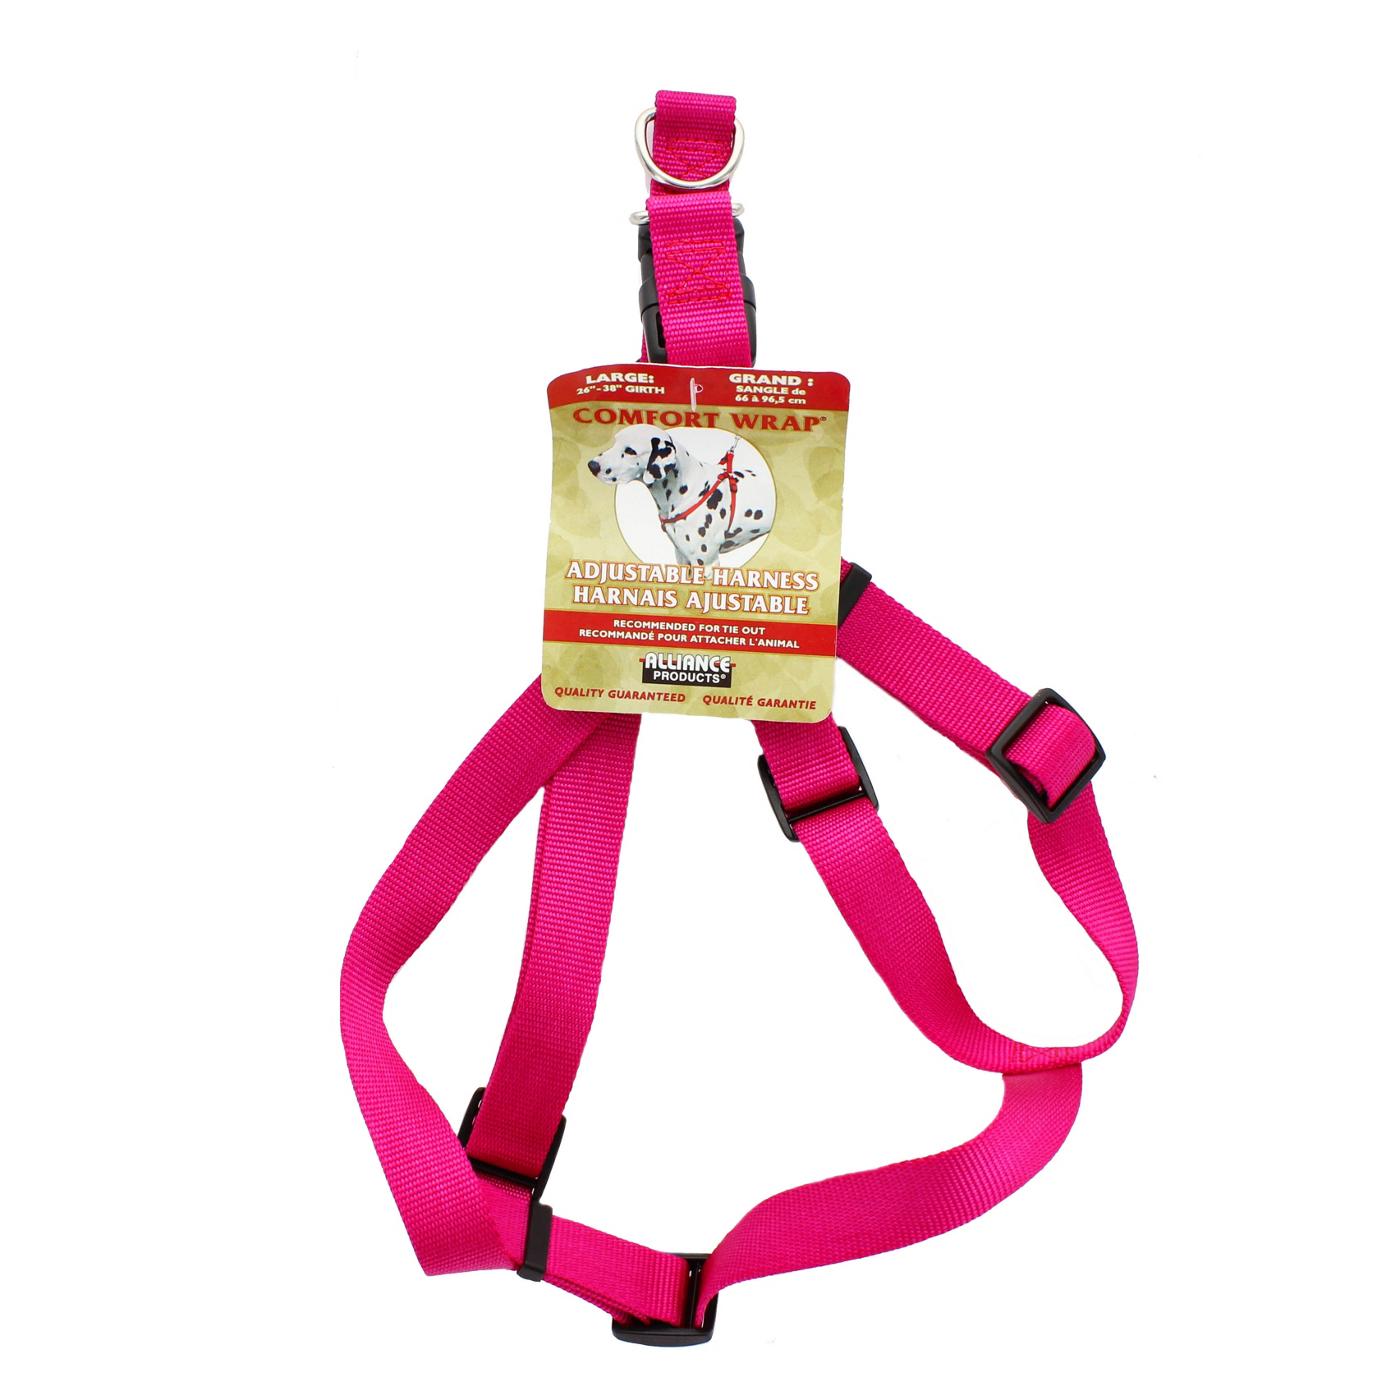 Alliance Comfort Wrap Nylon Large Harness Assorted Colors; image 1 of 2